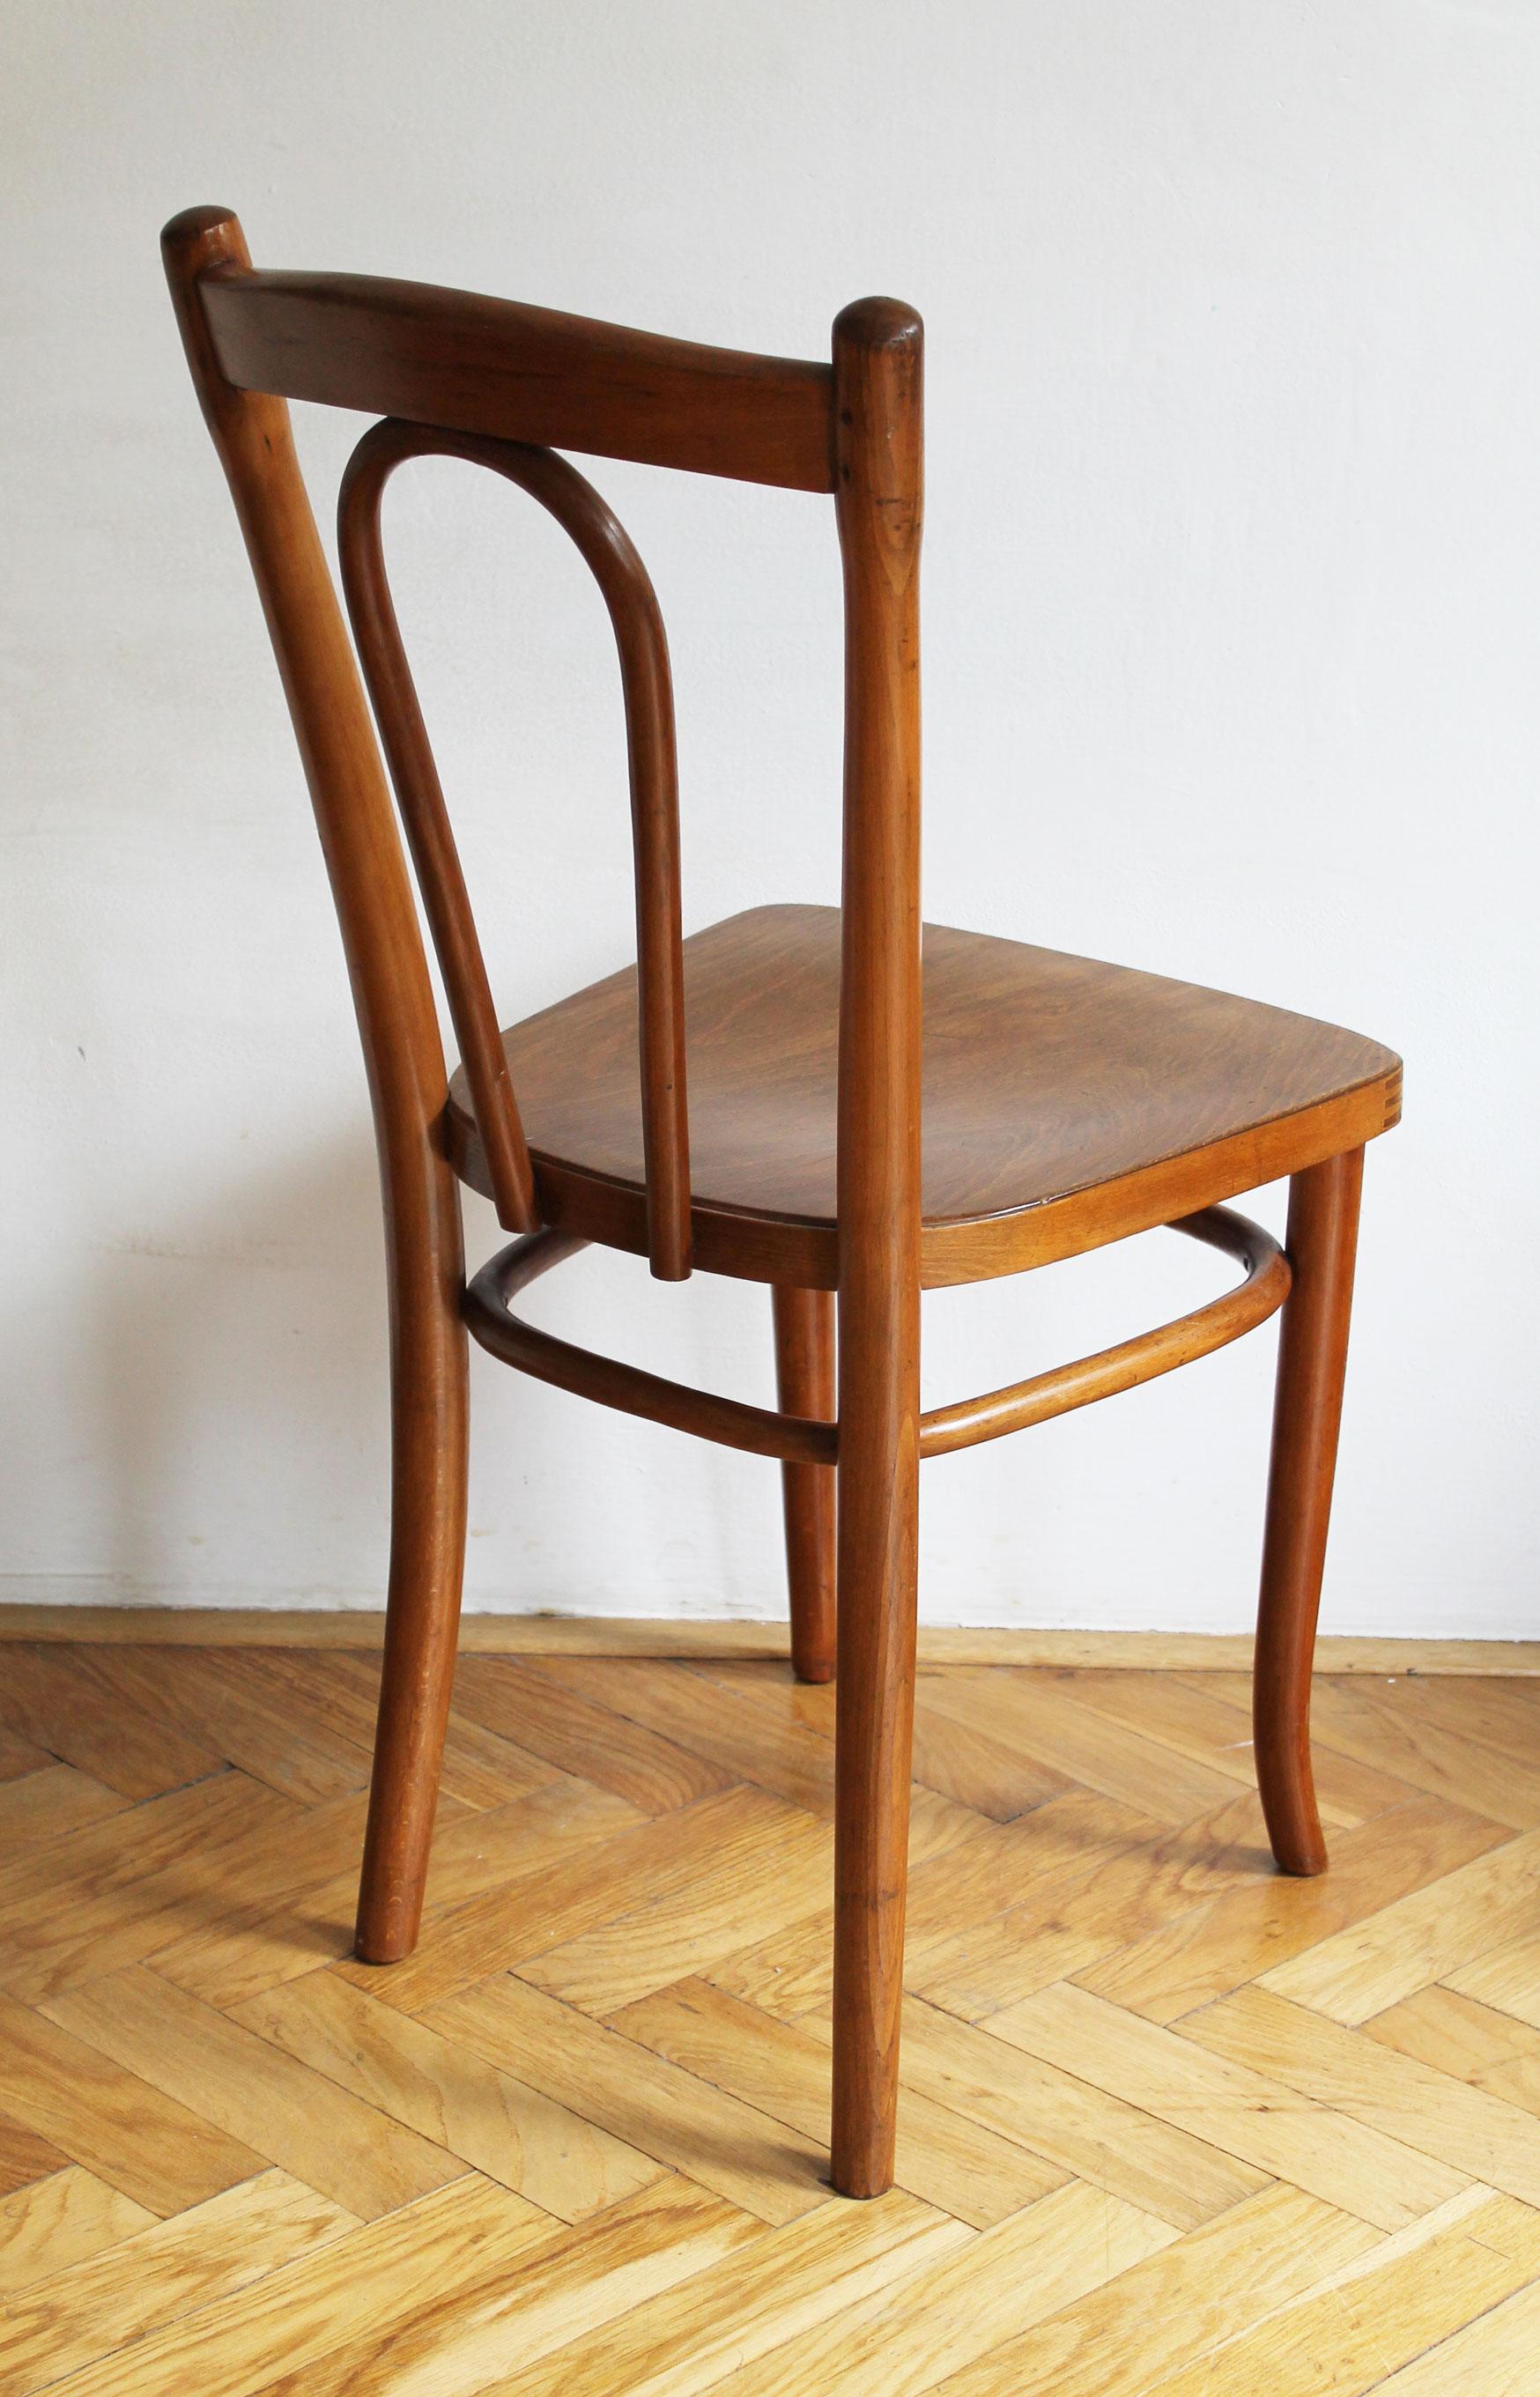 Czech 1920's Dining Chair Model No. 105 by Gebrüder Thonet For Sale